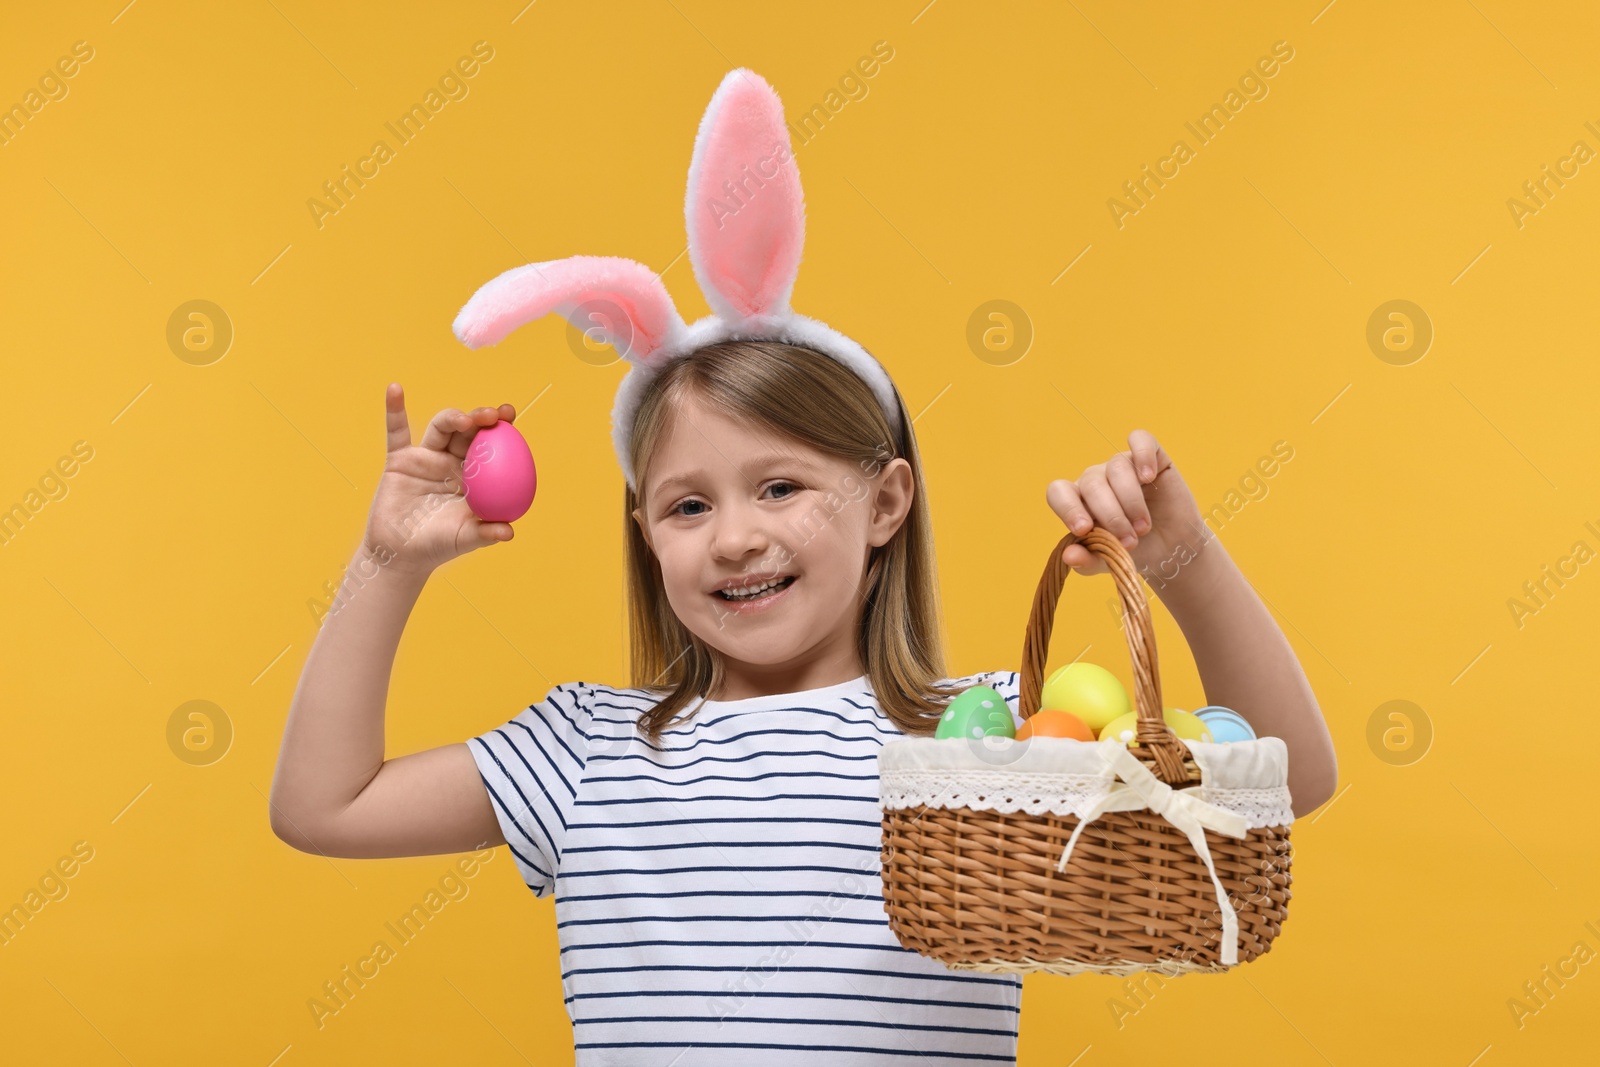 Photo of Easter celebration. Cute girl with bunny ears holding basket of painted eggs on orange background